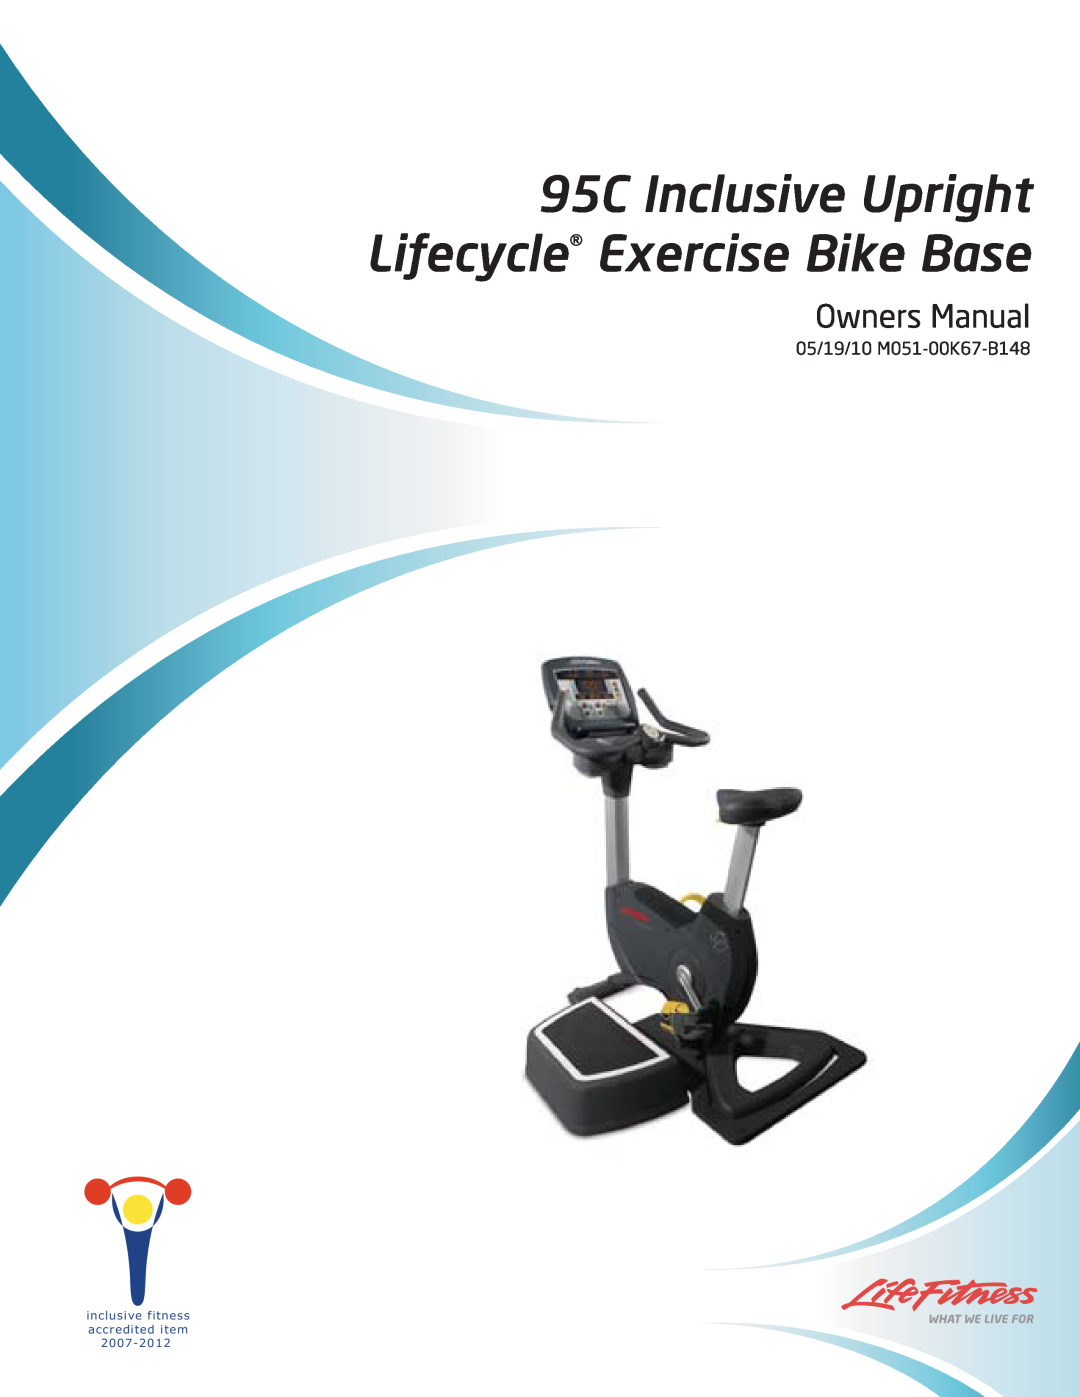 Life Fitness owner manual 95C Inclusive Upright Lifecycle Exercise Bike Base, Owners Manual, 05/19/10 M051-00K67-B148 